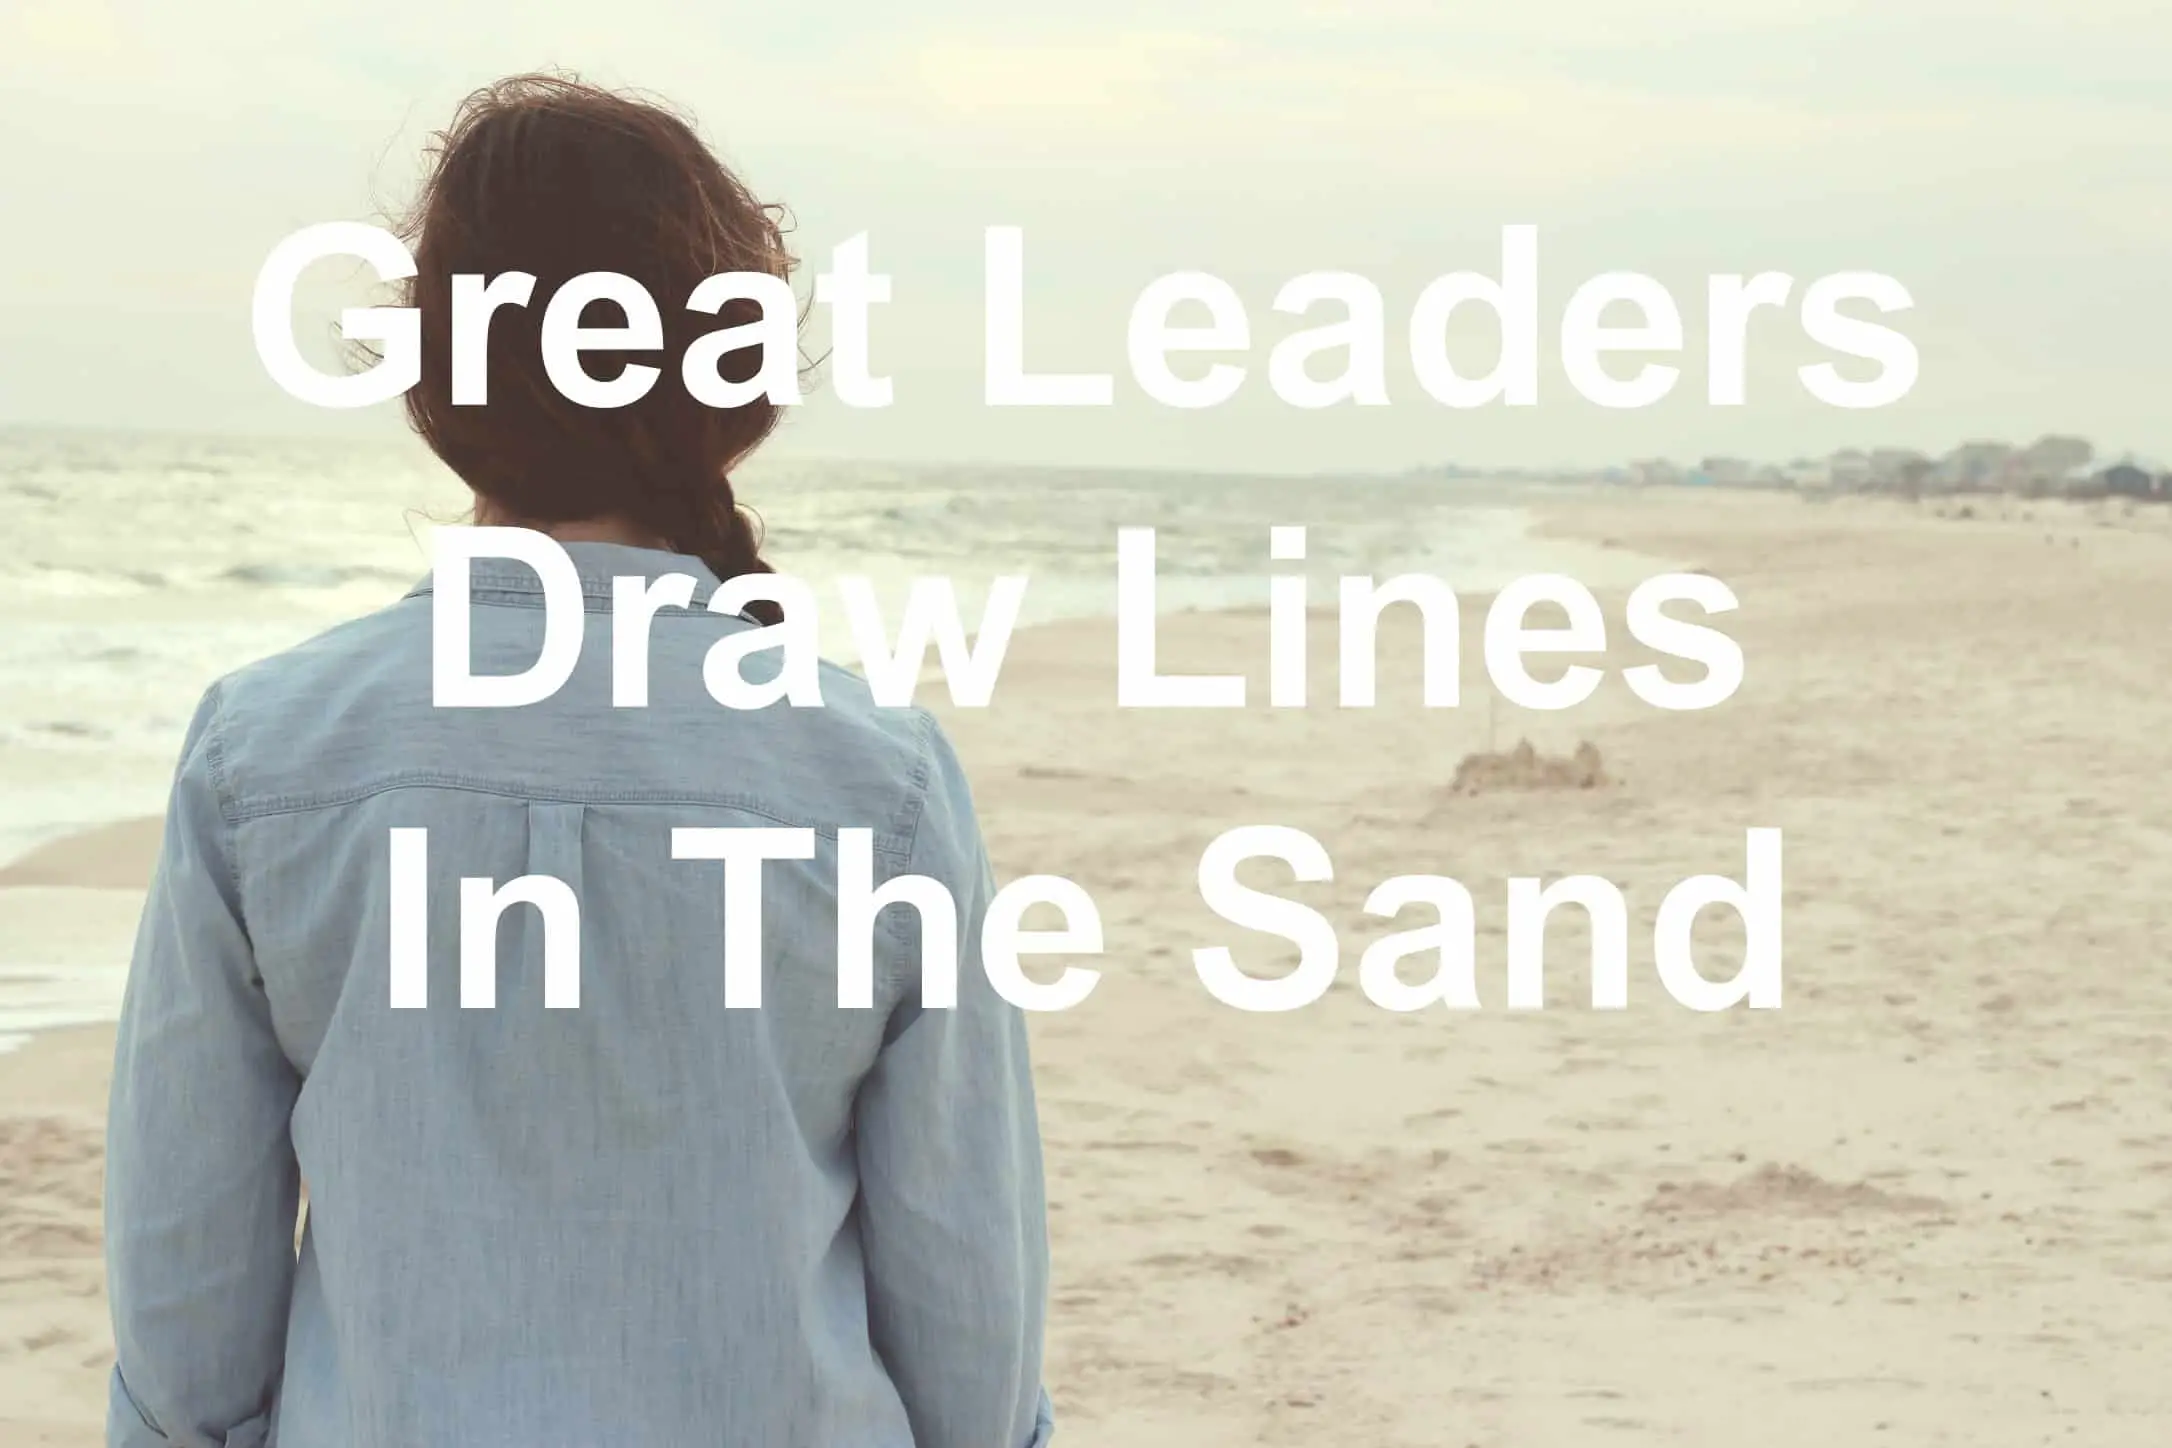 Great Leaders Draw Lines In The Sand